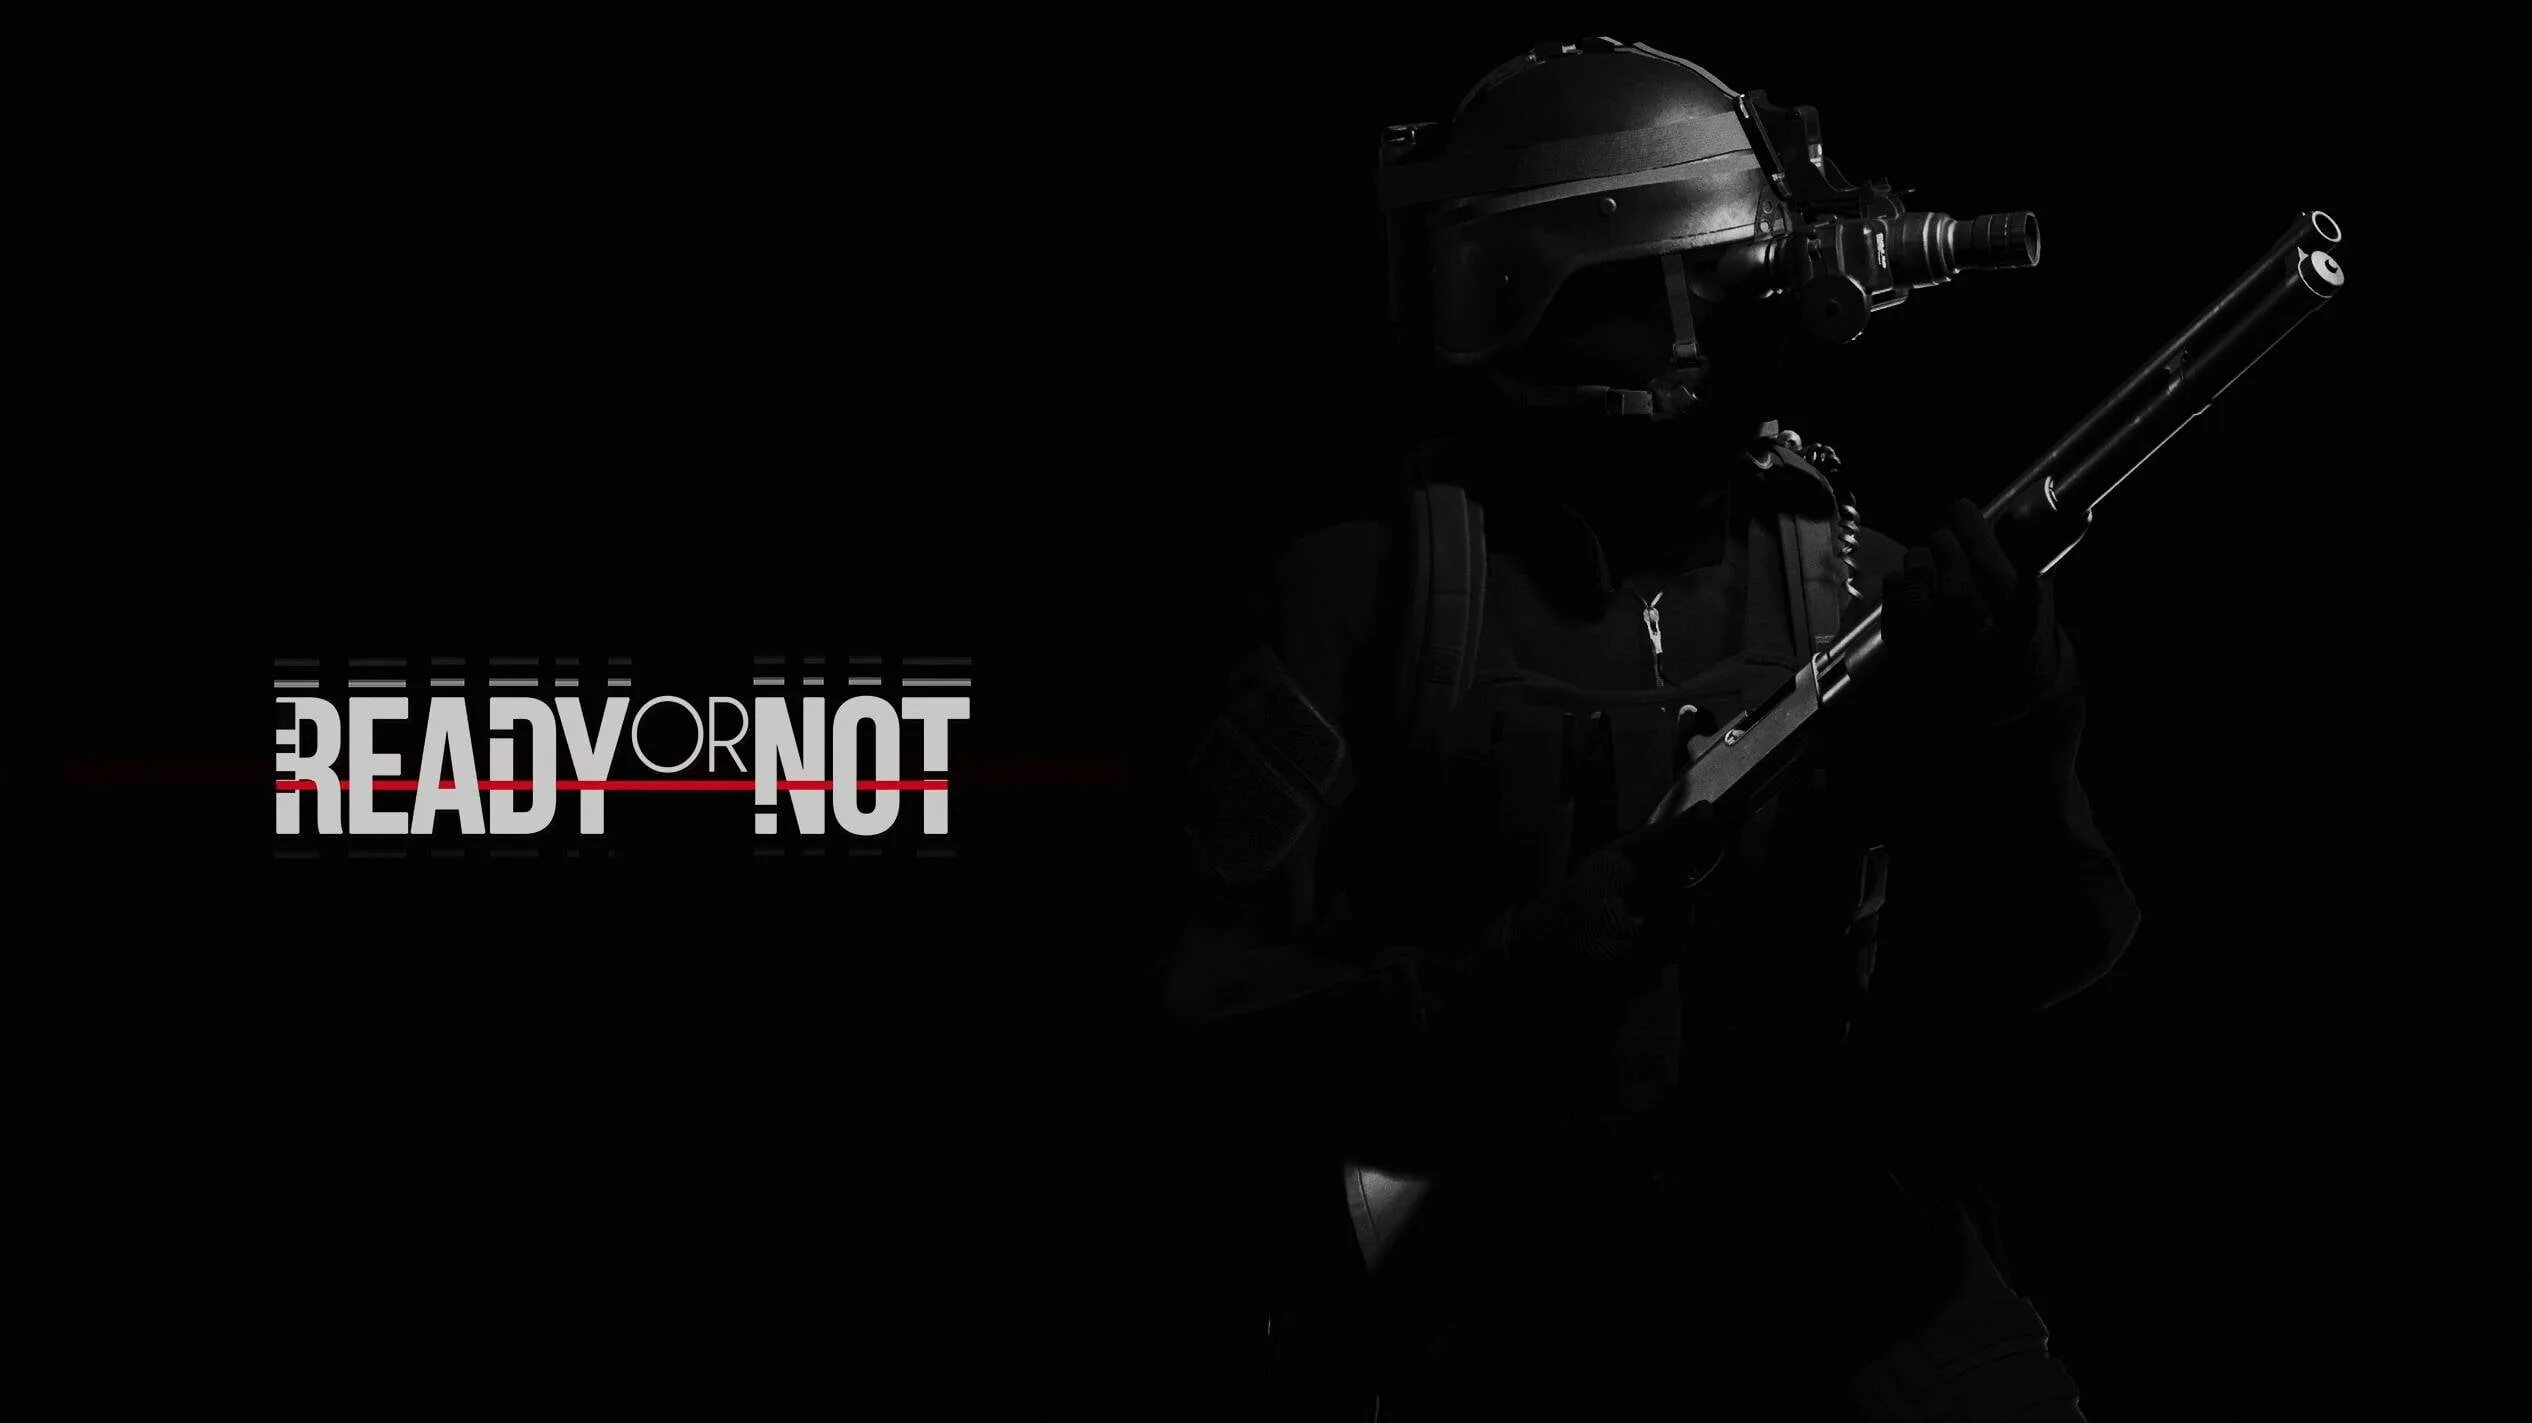 Ready or not фон. Ready or not игра. Ready or not обои. SWAT обои. Ready or not версия